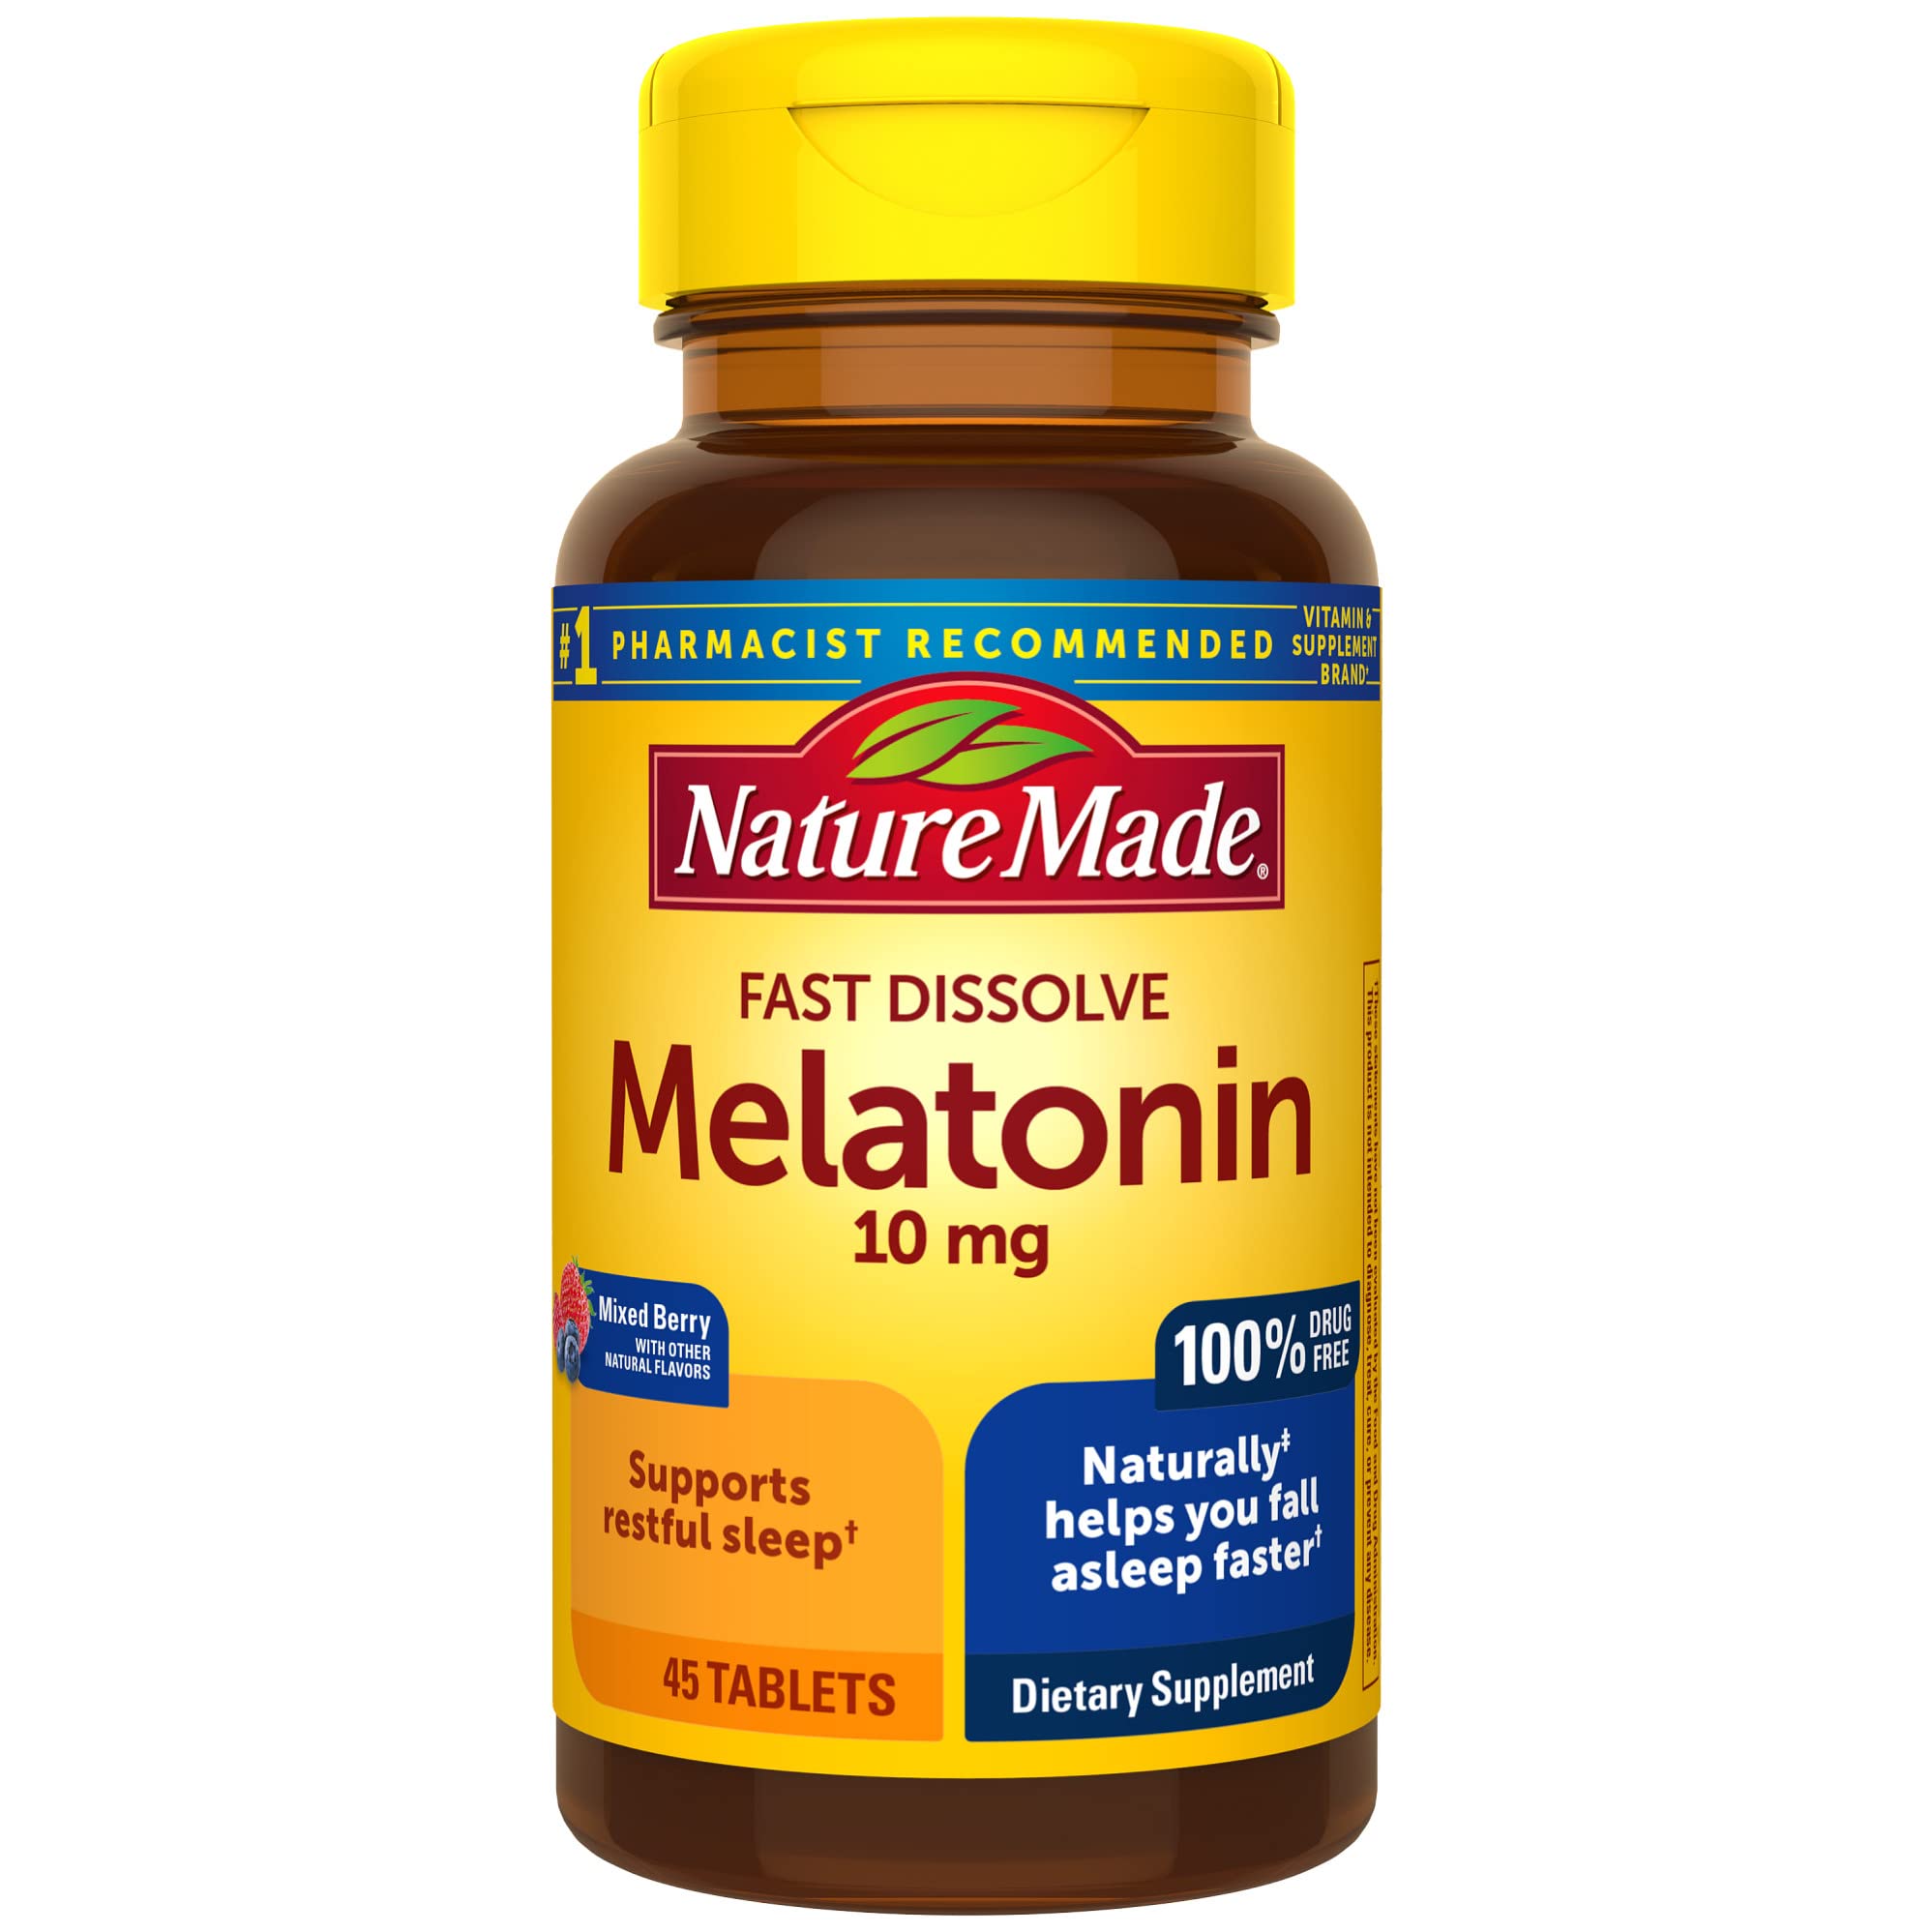 Nature Made Fast Dissolve Melatonin 10mg, Maximum Strength 100% Drug Free Sleep Aid for Adults, 45 Tablets, 45 Day Supply $3.13